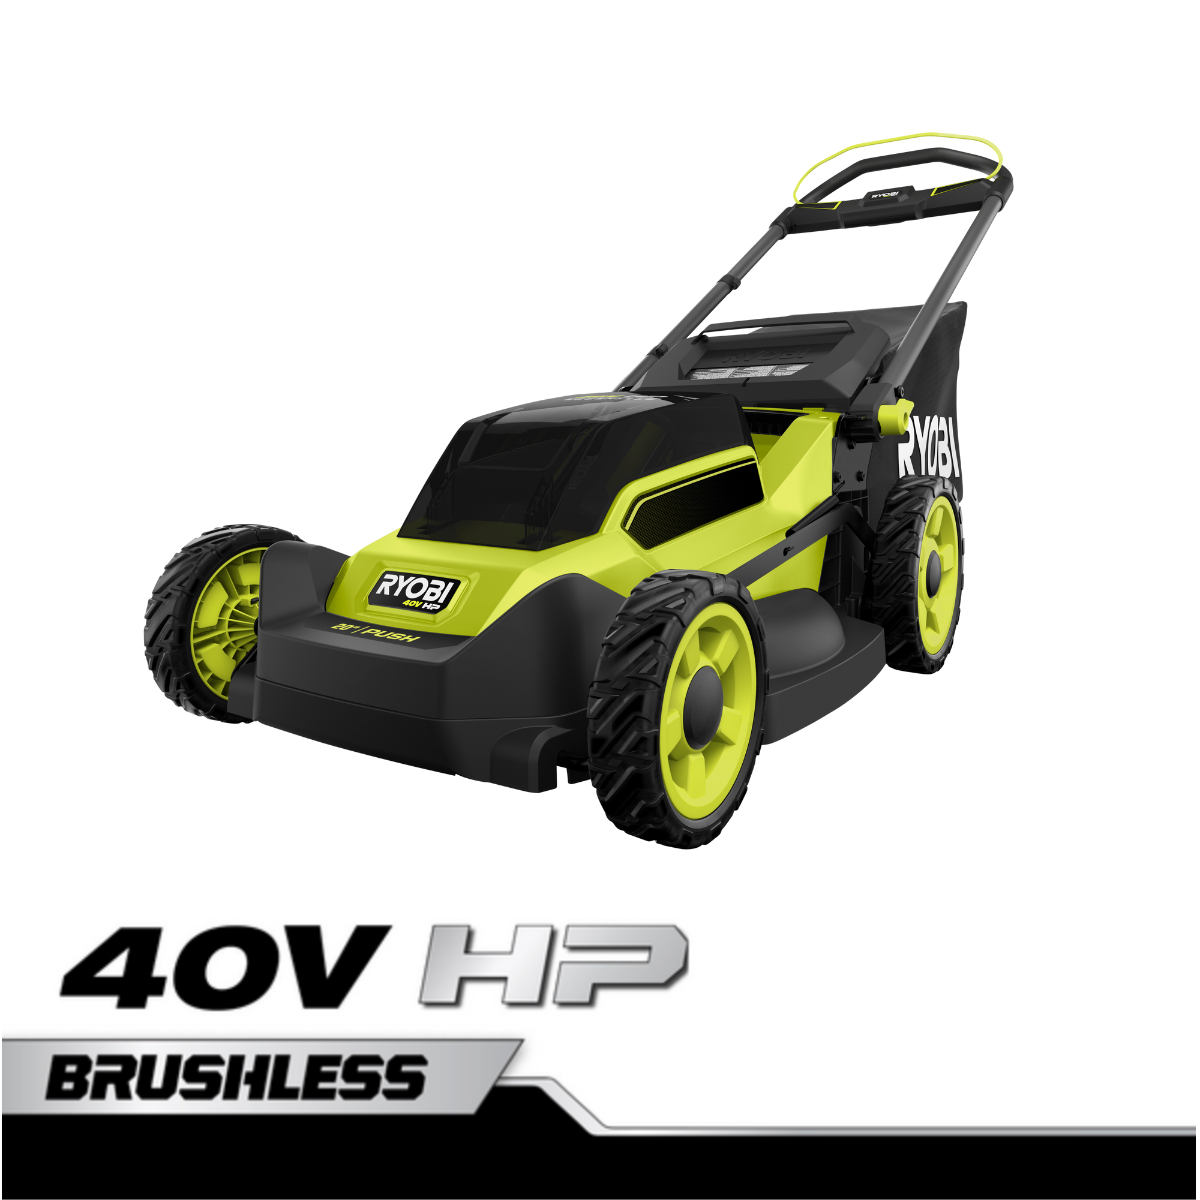 Feature Image for 40V HP BRUSHLESS 20" PUSH LAWN MOWER.